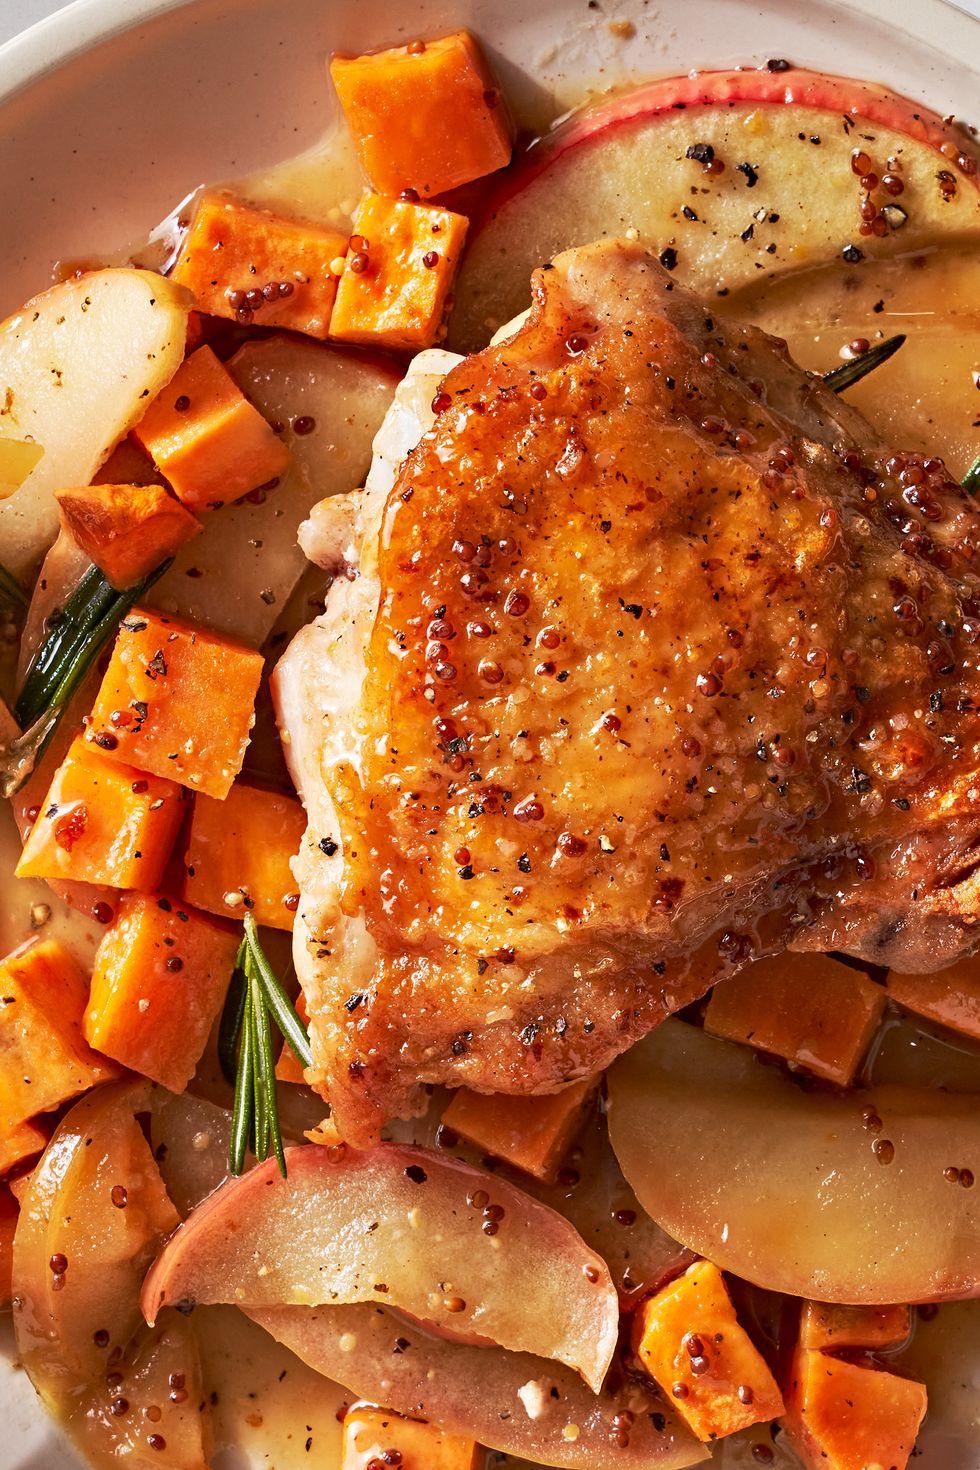 cider glazed chicken thighs with apples and sweet potatoes